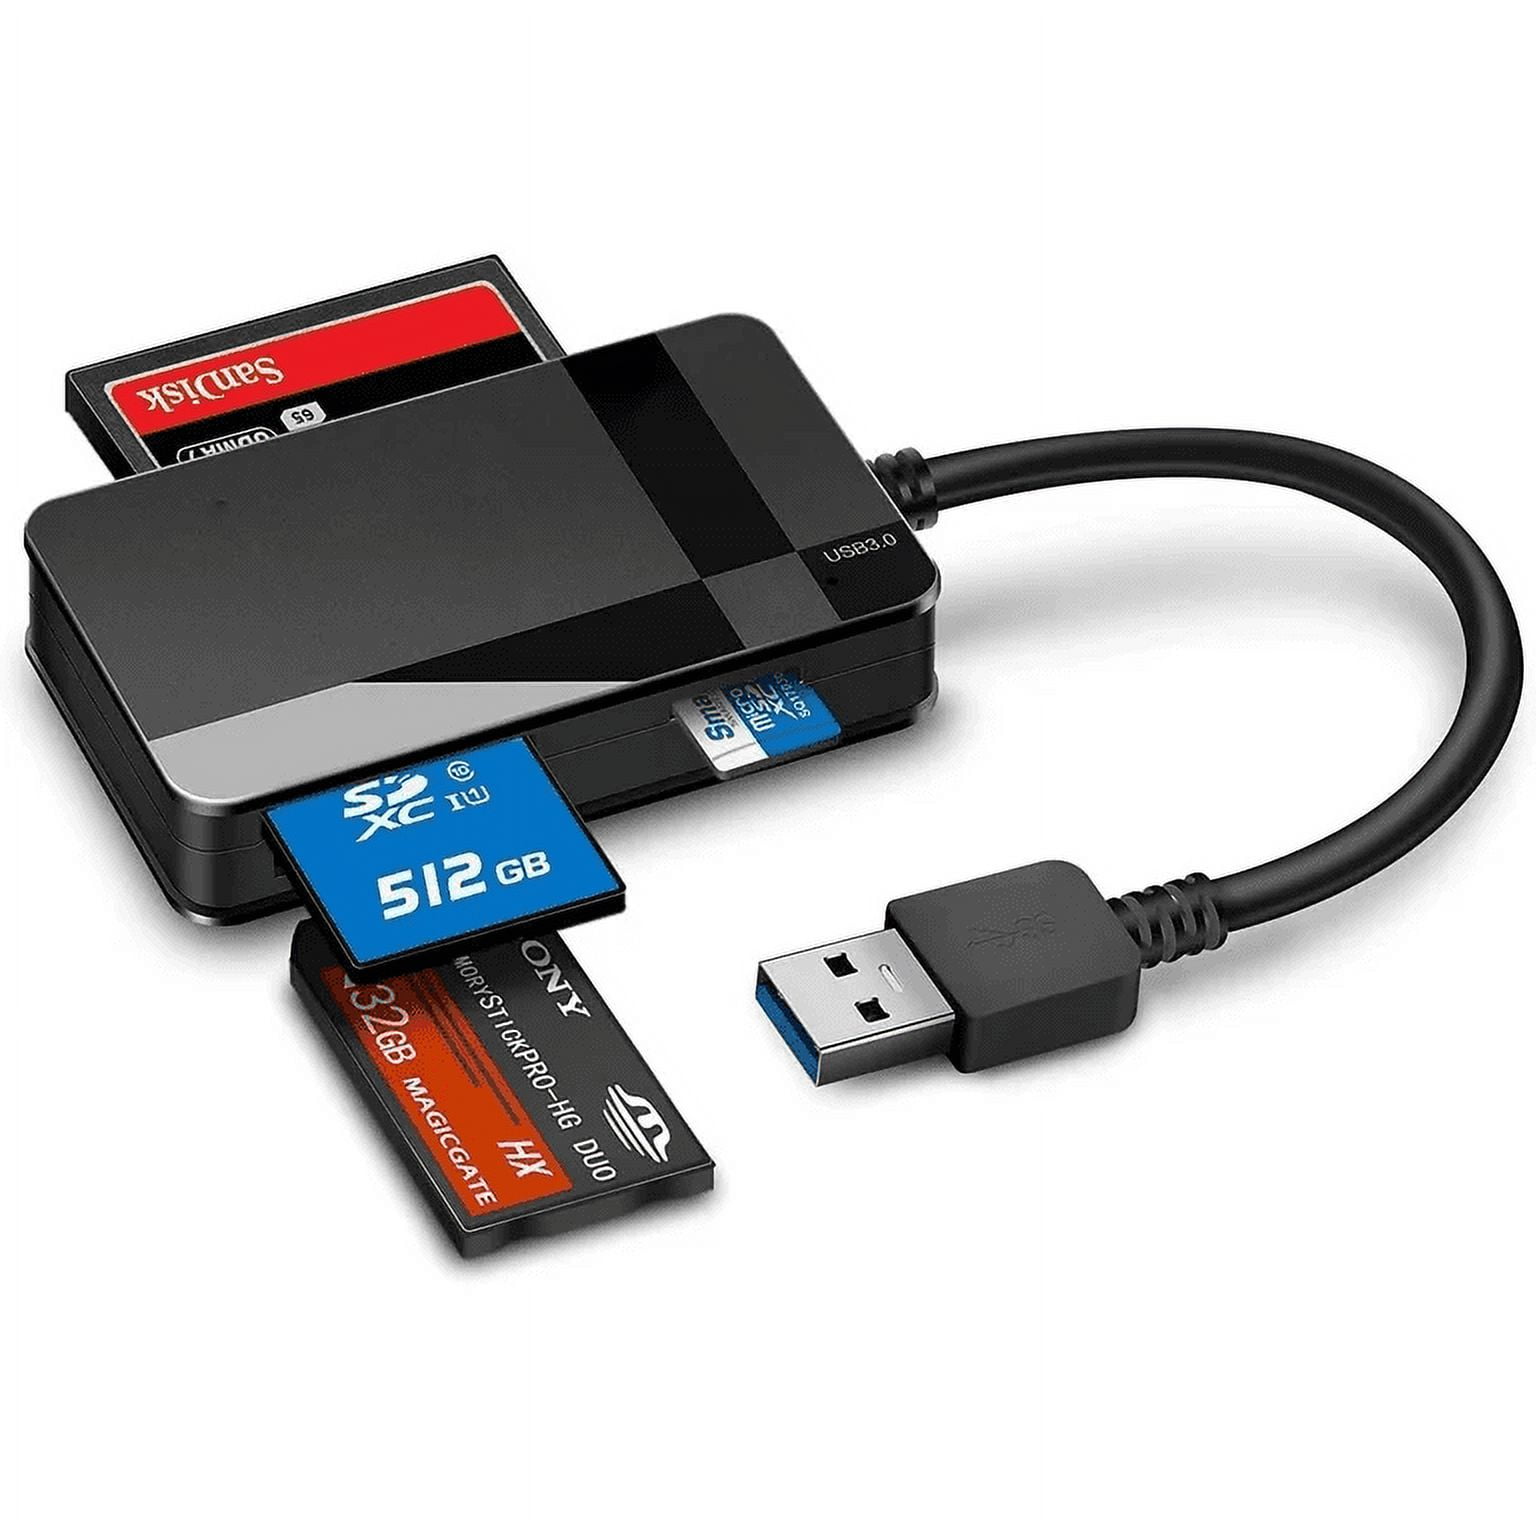 CLE USB SUPPORT MICRO SD